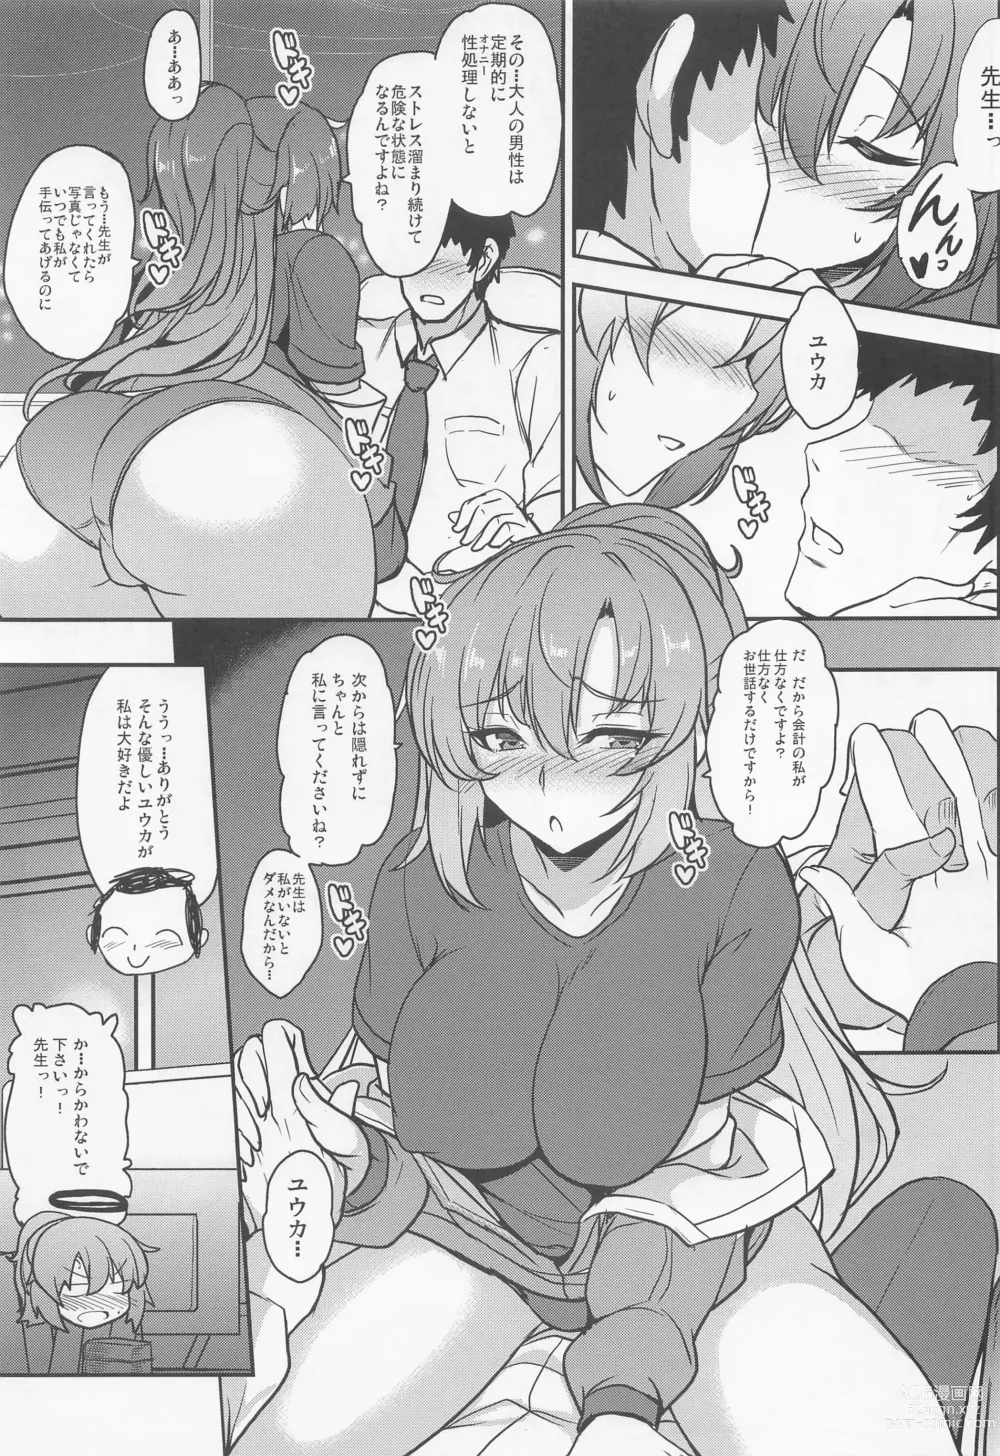 Page 6 of doujinshi Blue Passion shell